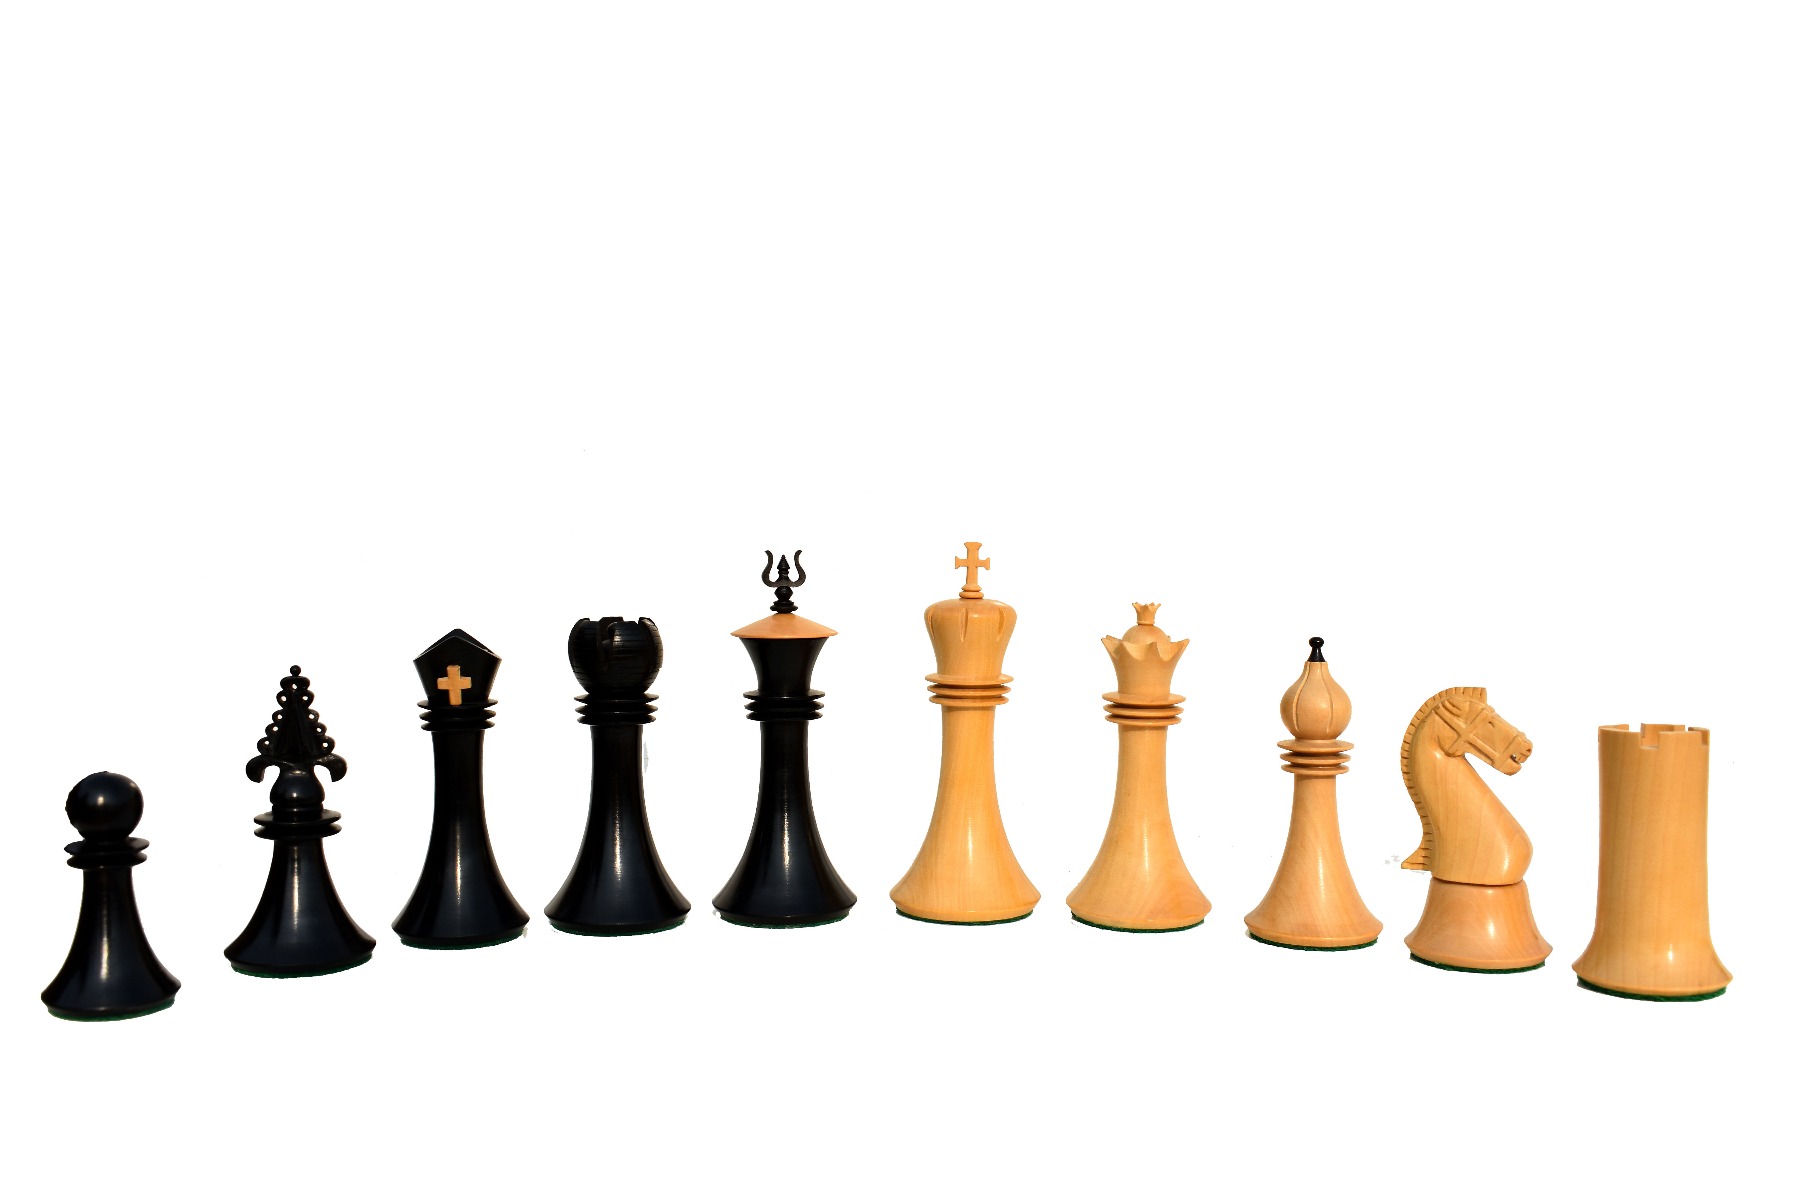 Queen, Jester ,Archbishop & Chancellor Best Chessmen Series  Capablanca Chess Pieces , Boxwood & Ebony , 4.25 King